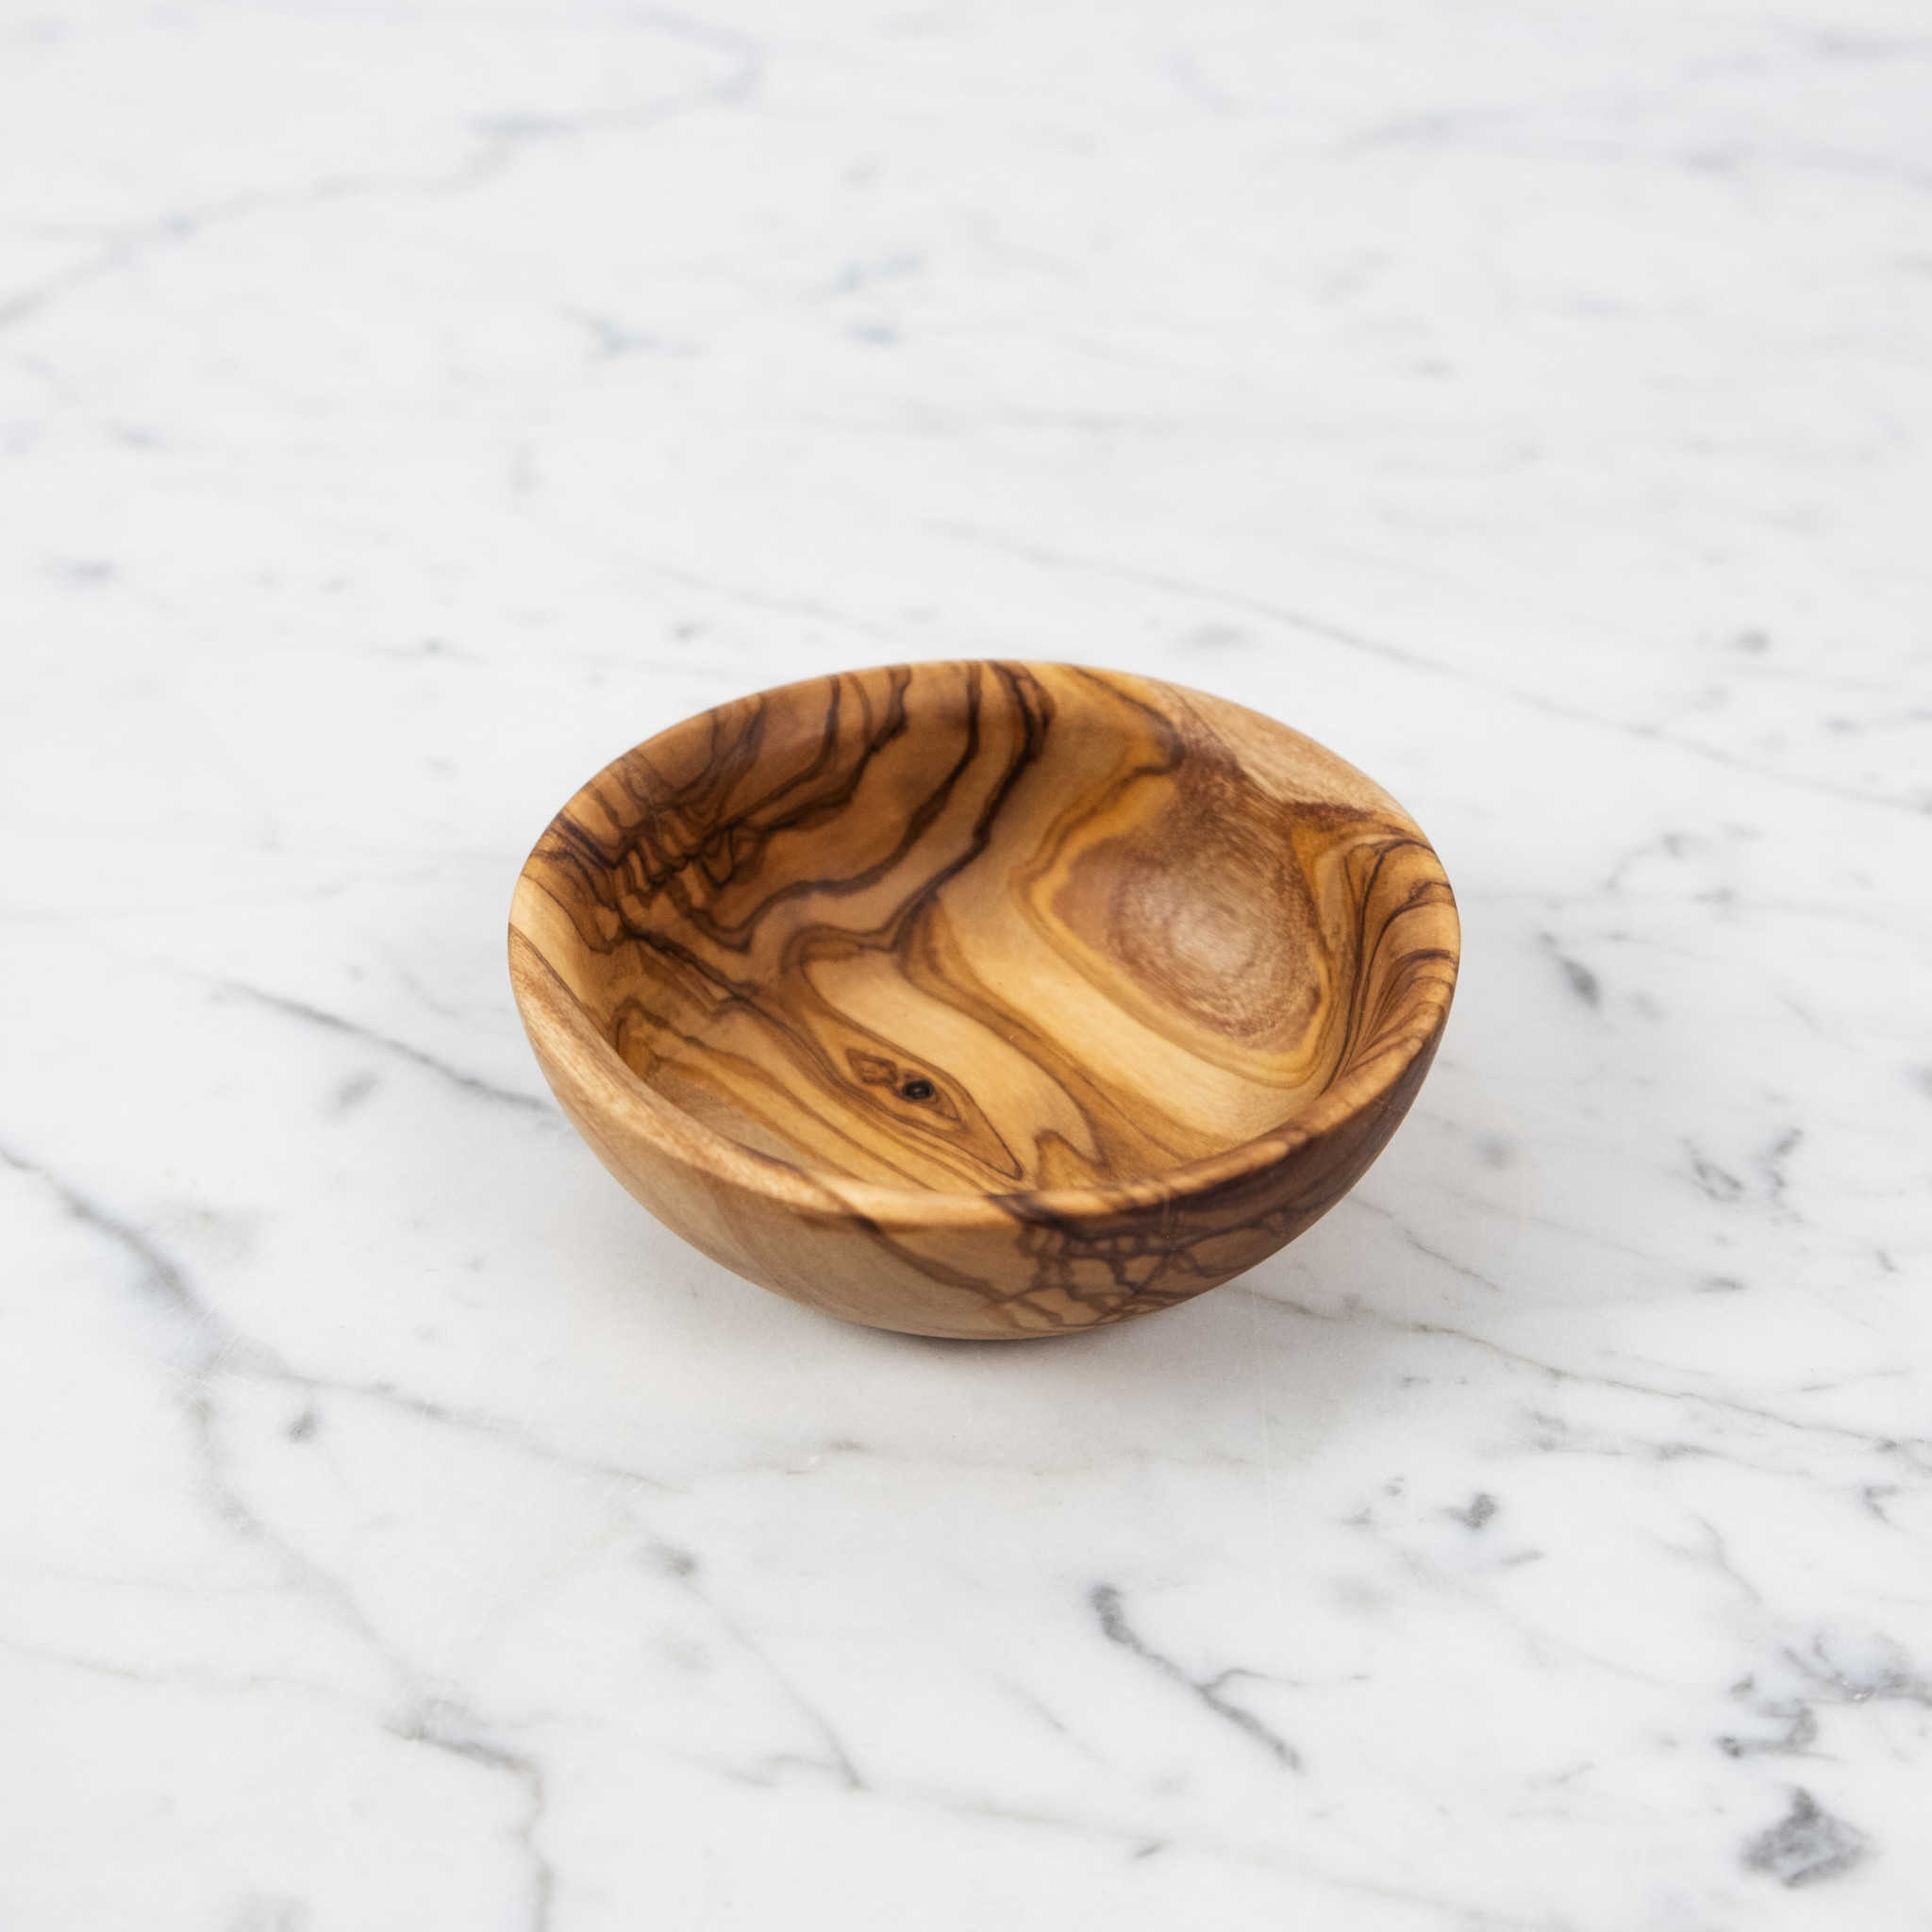 Olivewood Pinch Bowl - 3.5"